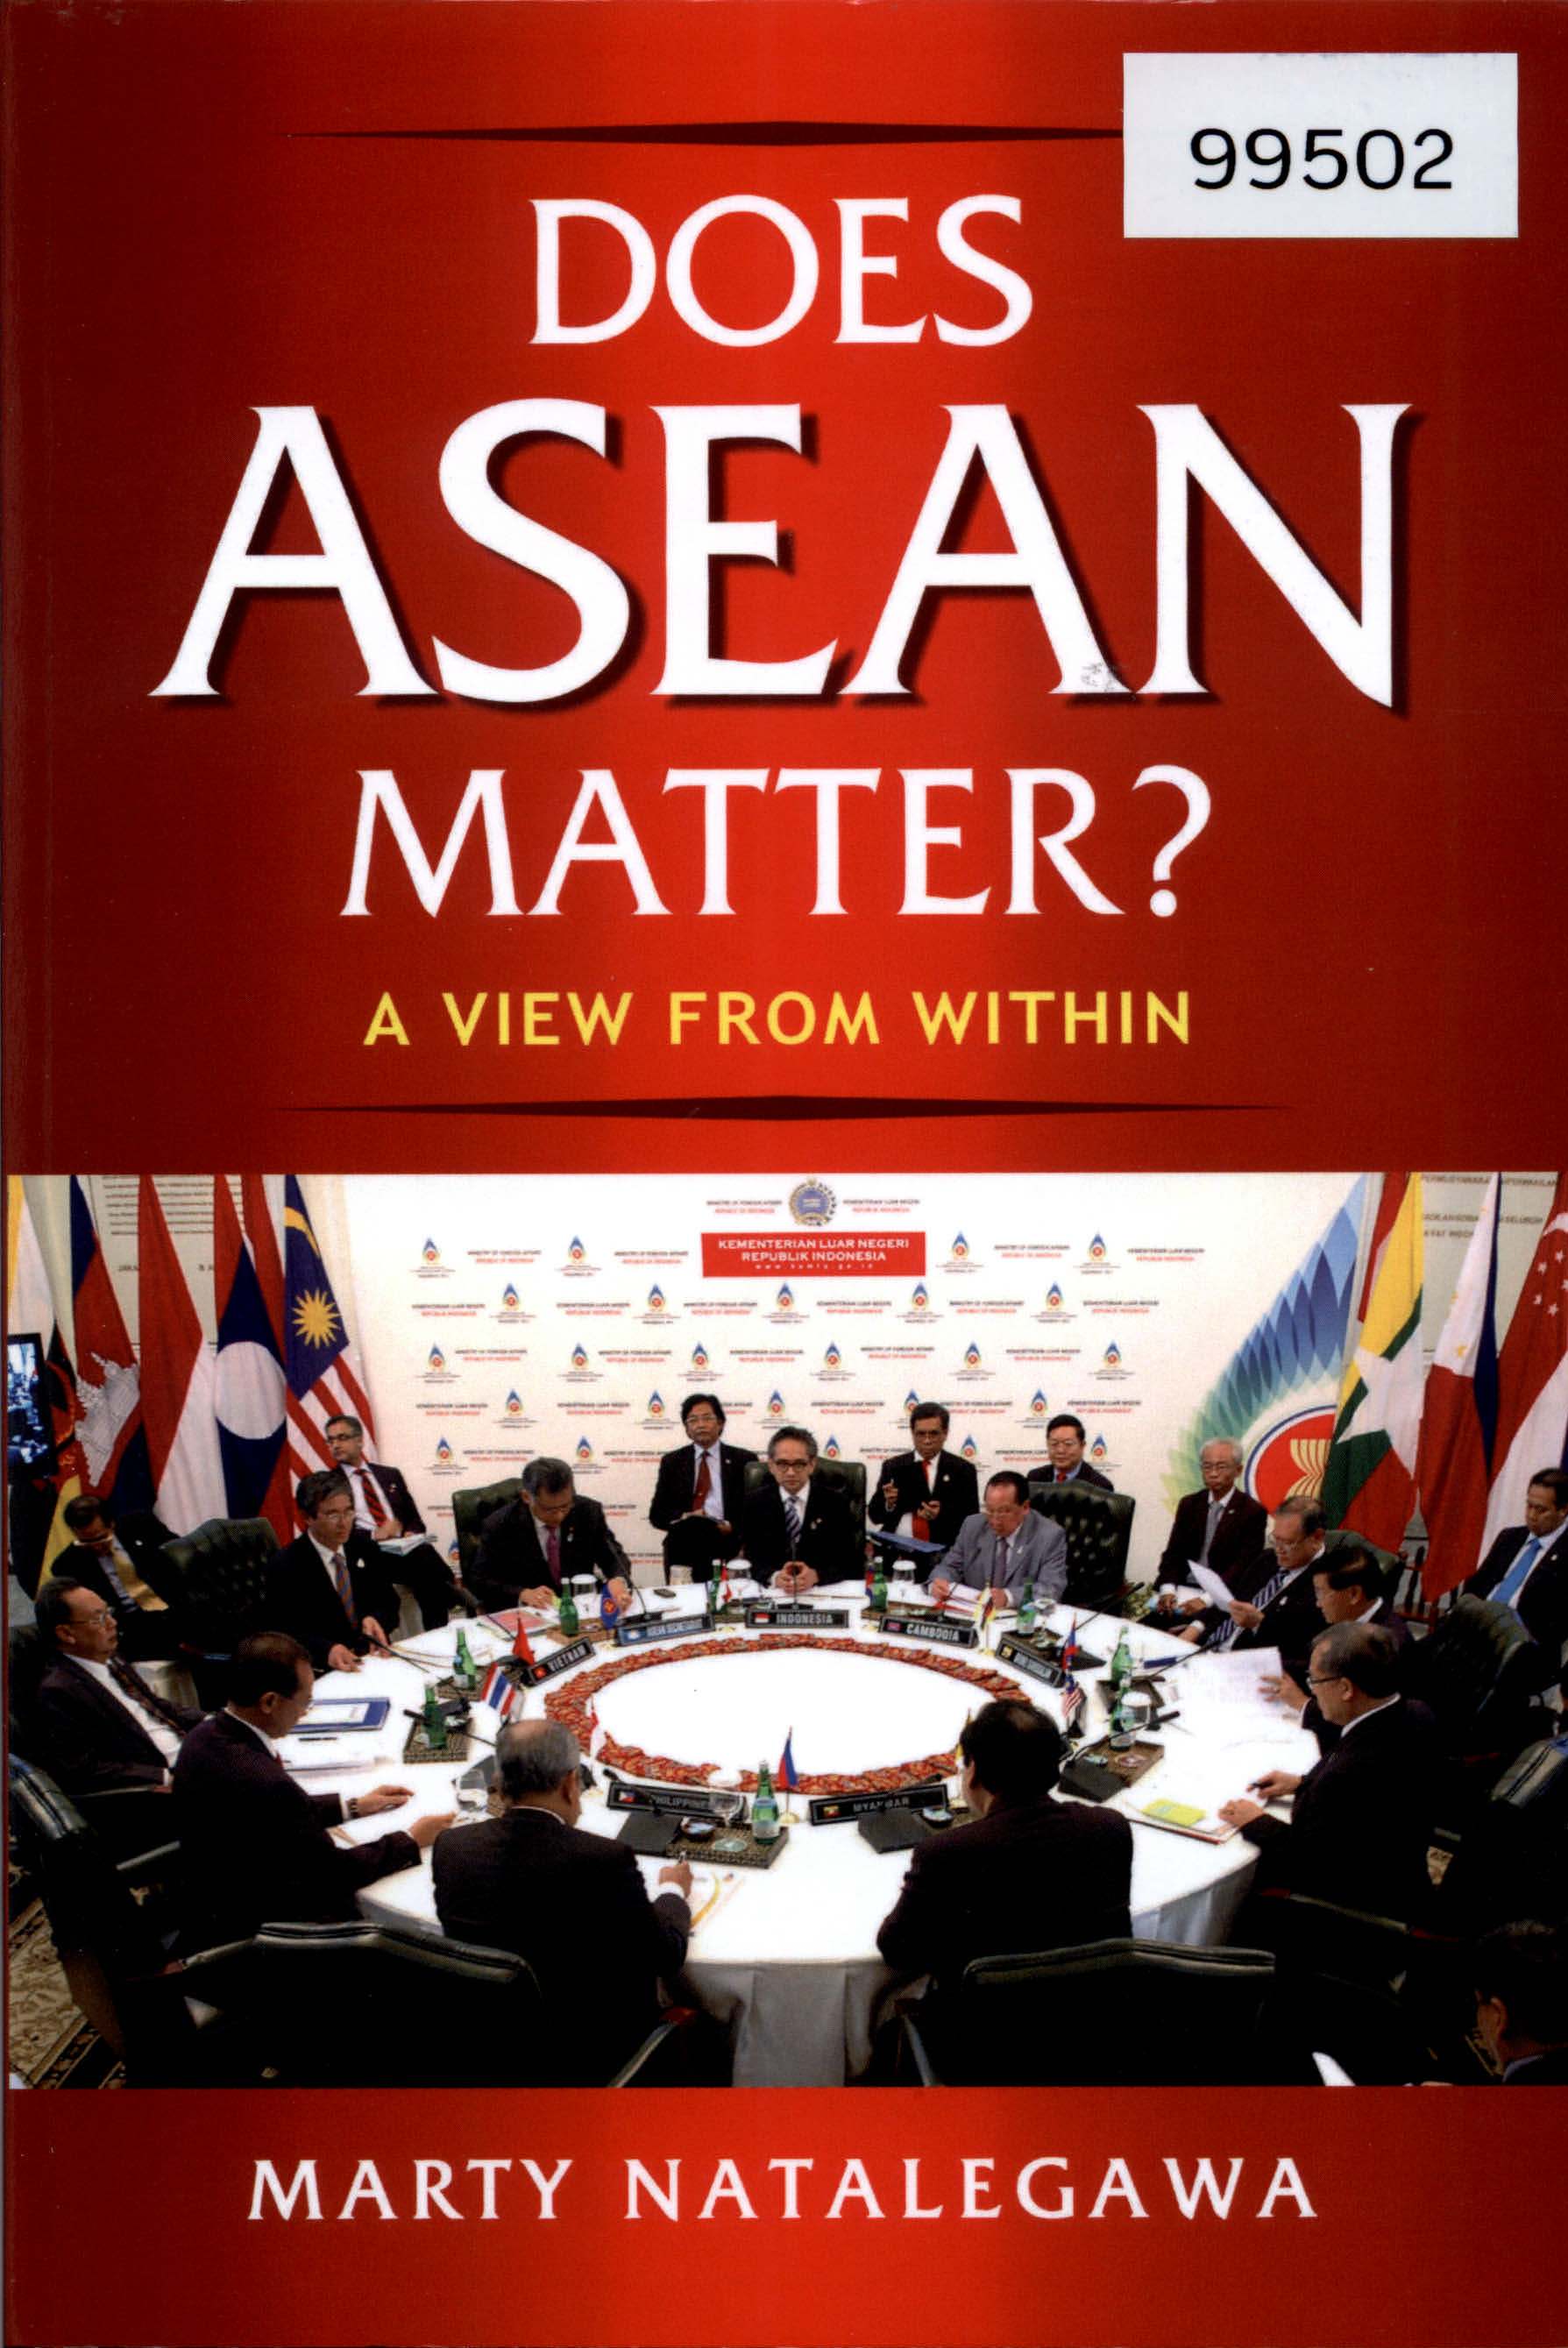 Does ASEAN matter: a view from within